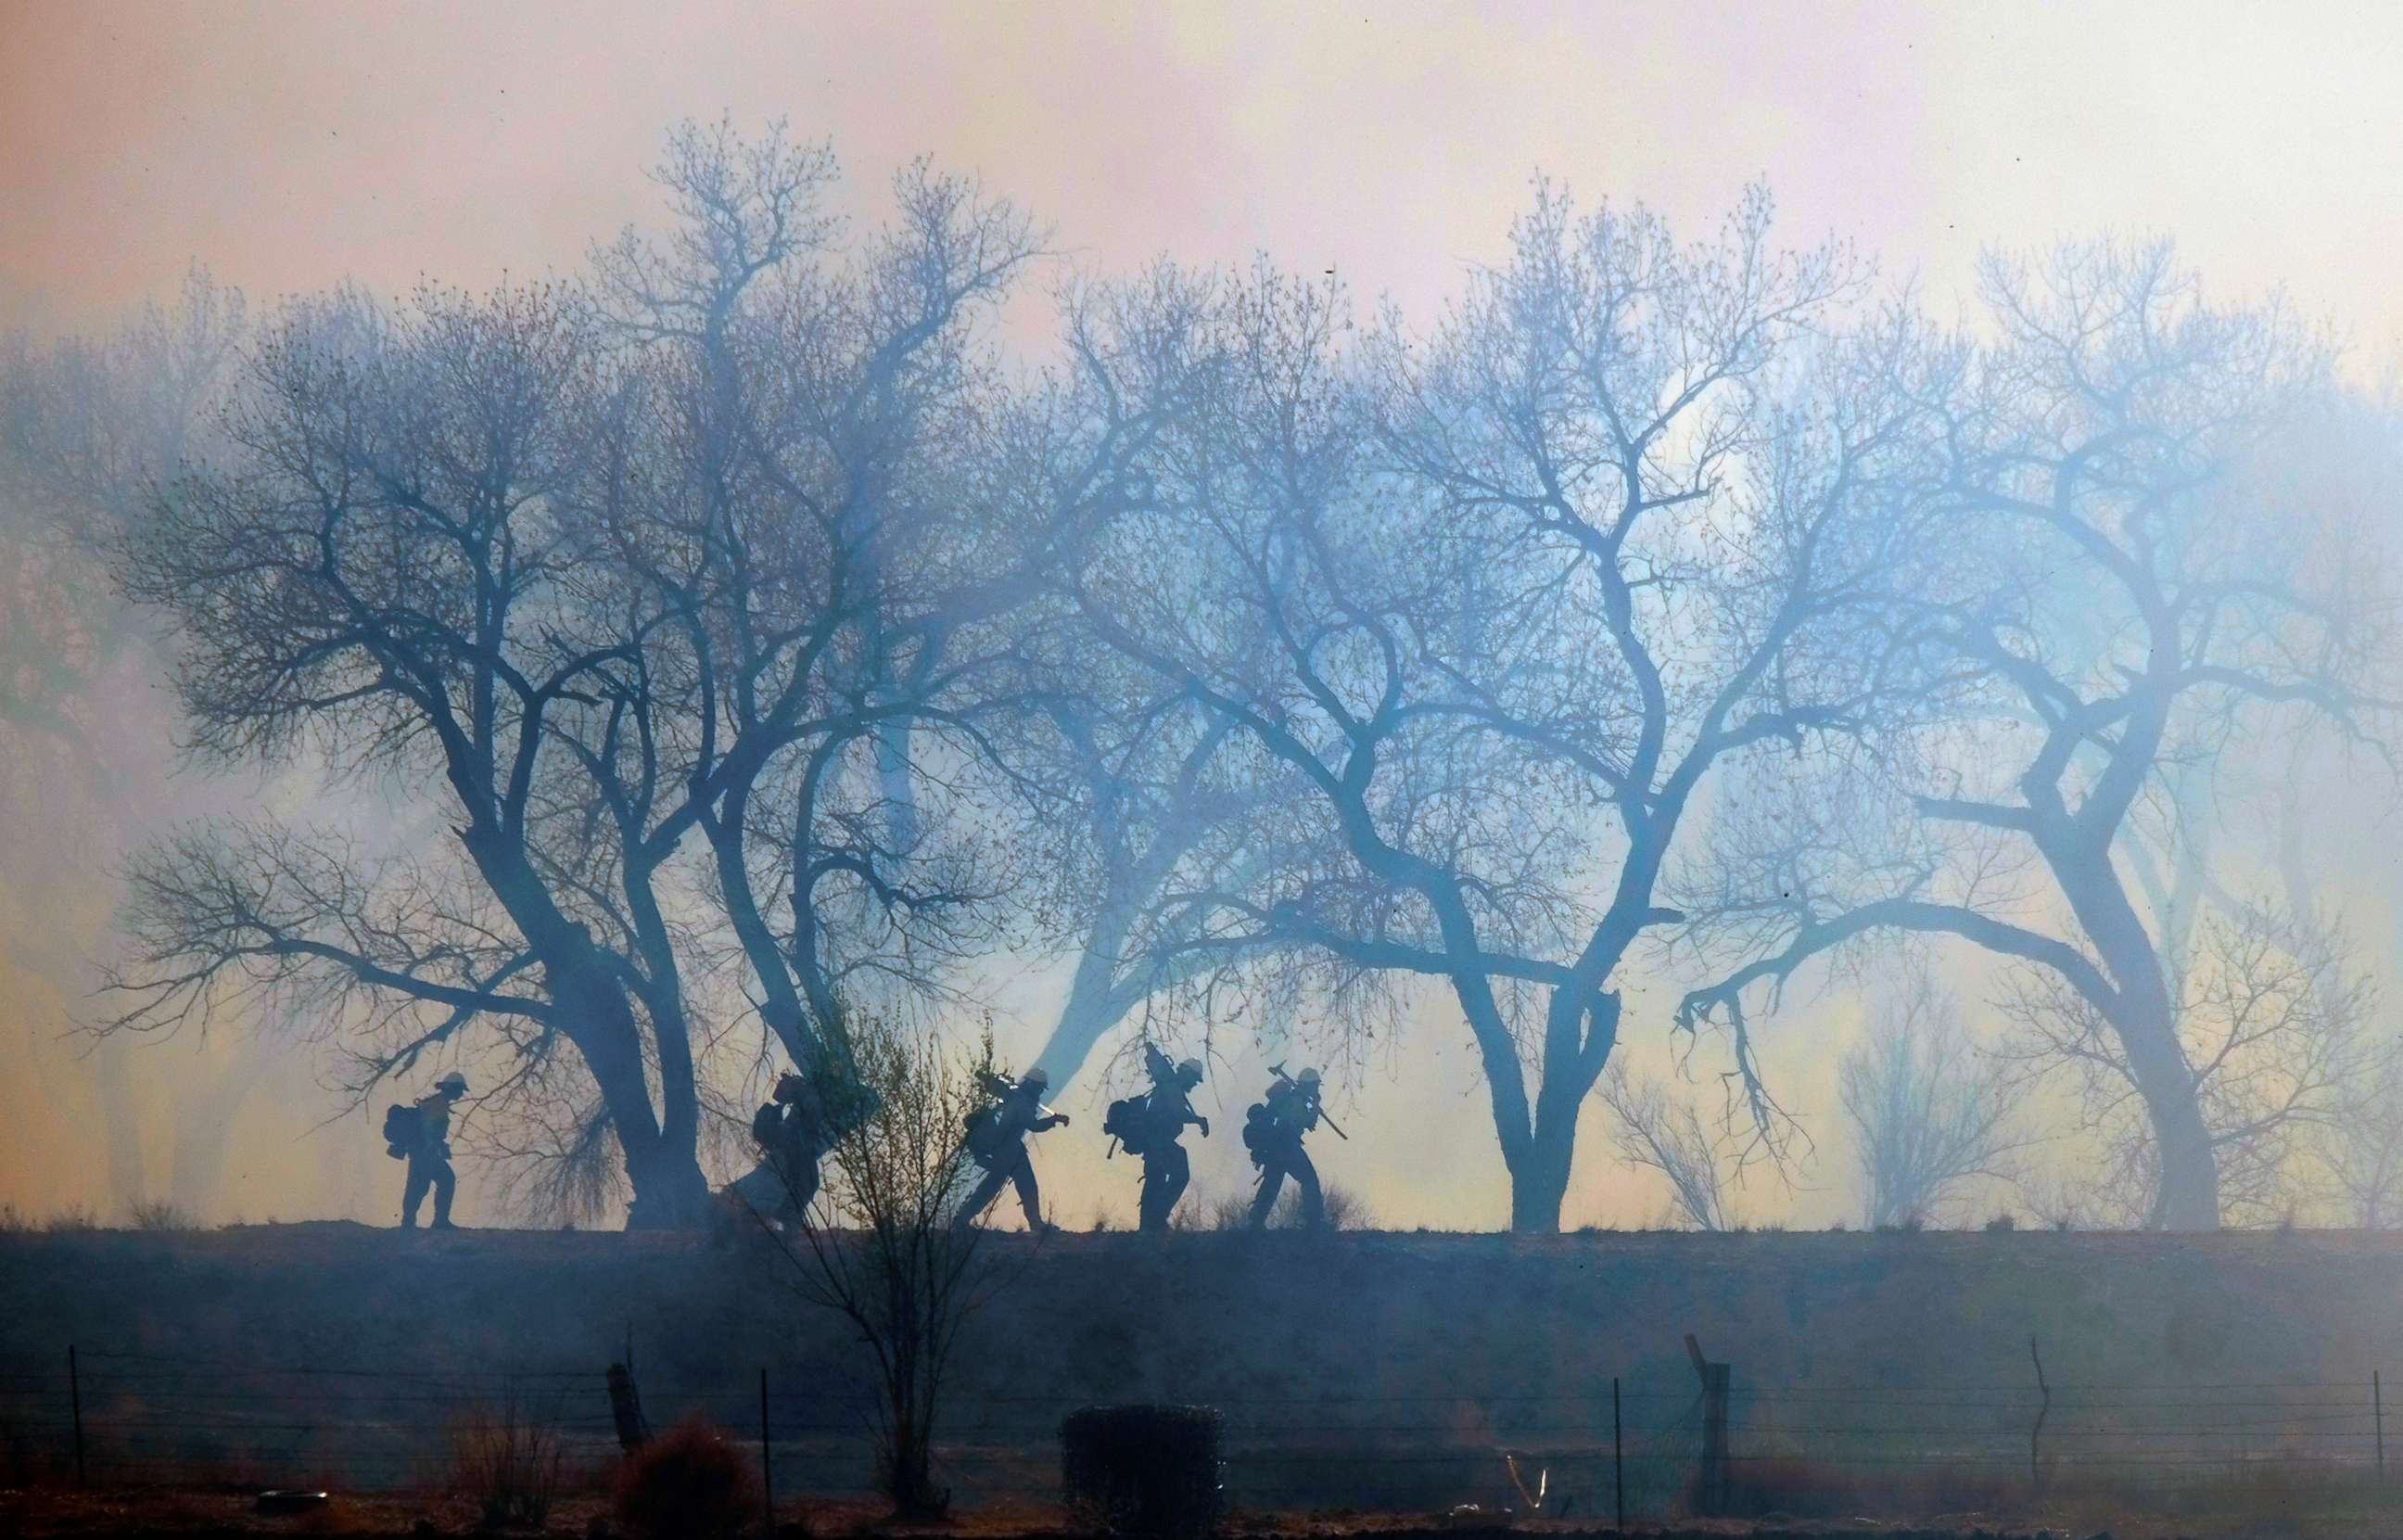 PHOTO: Fire crews work on setting up a line on the north end of the Big Hole Fire in Belen, New Mexico, April 12, 2022.